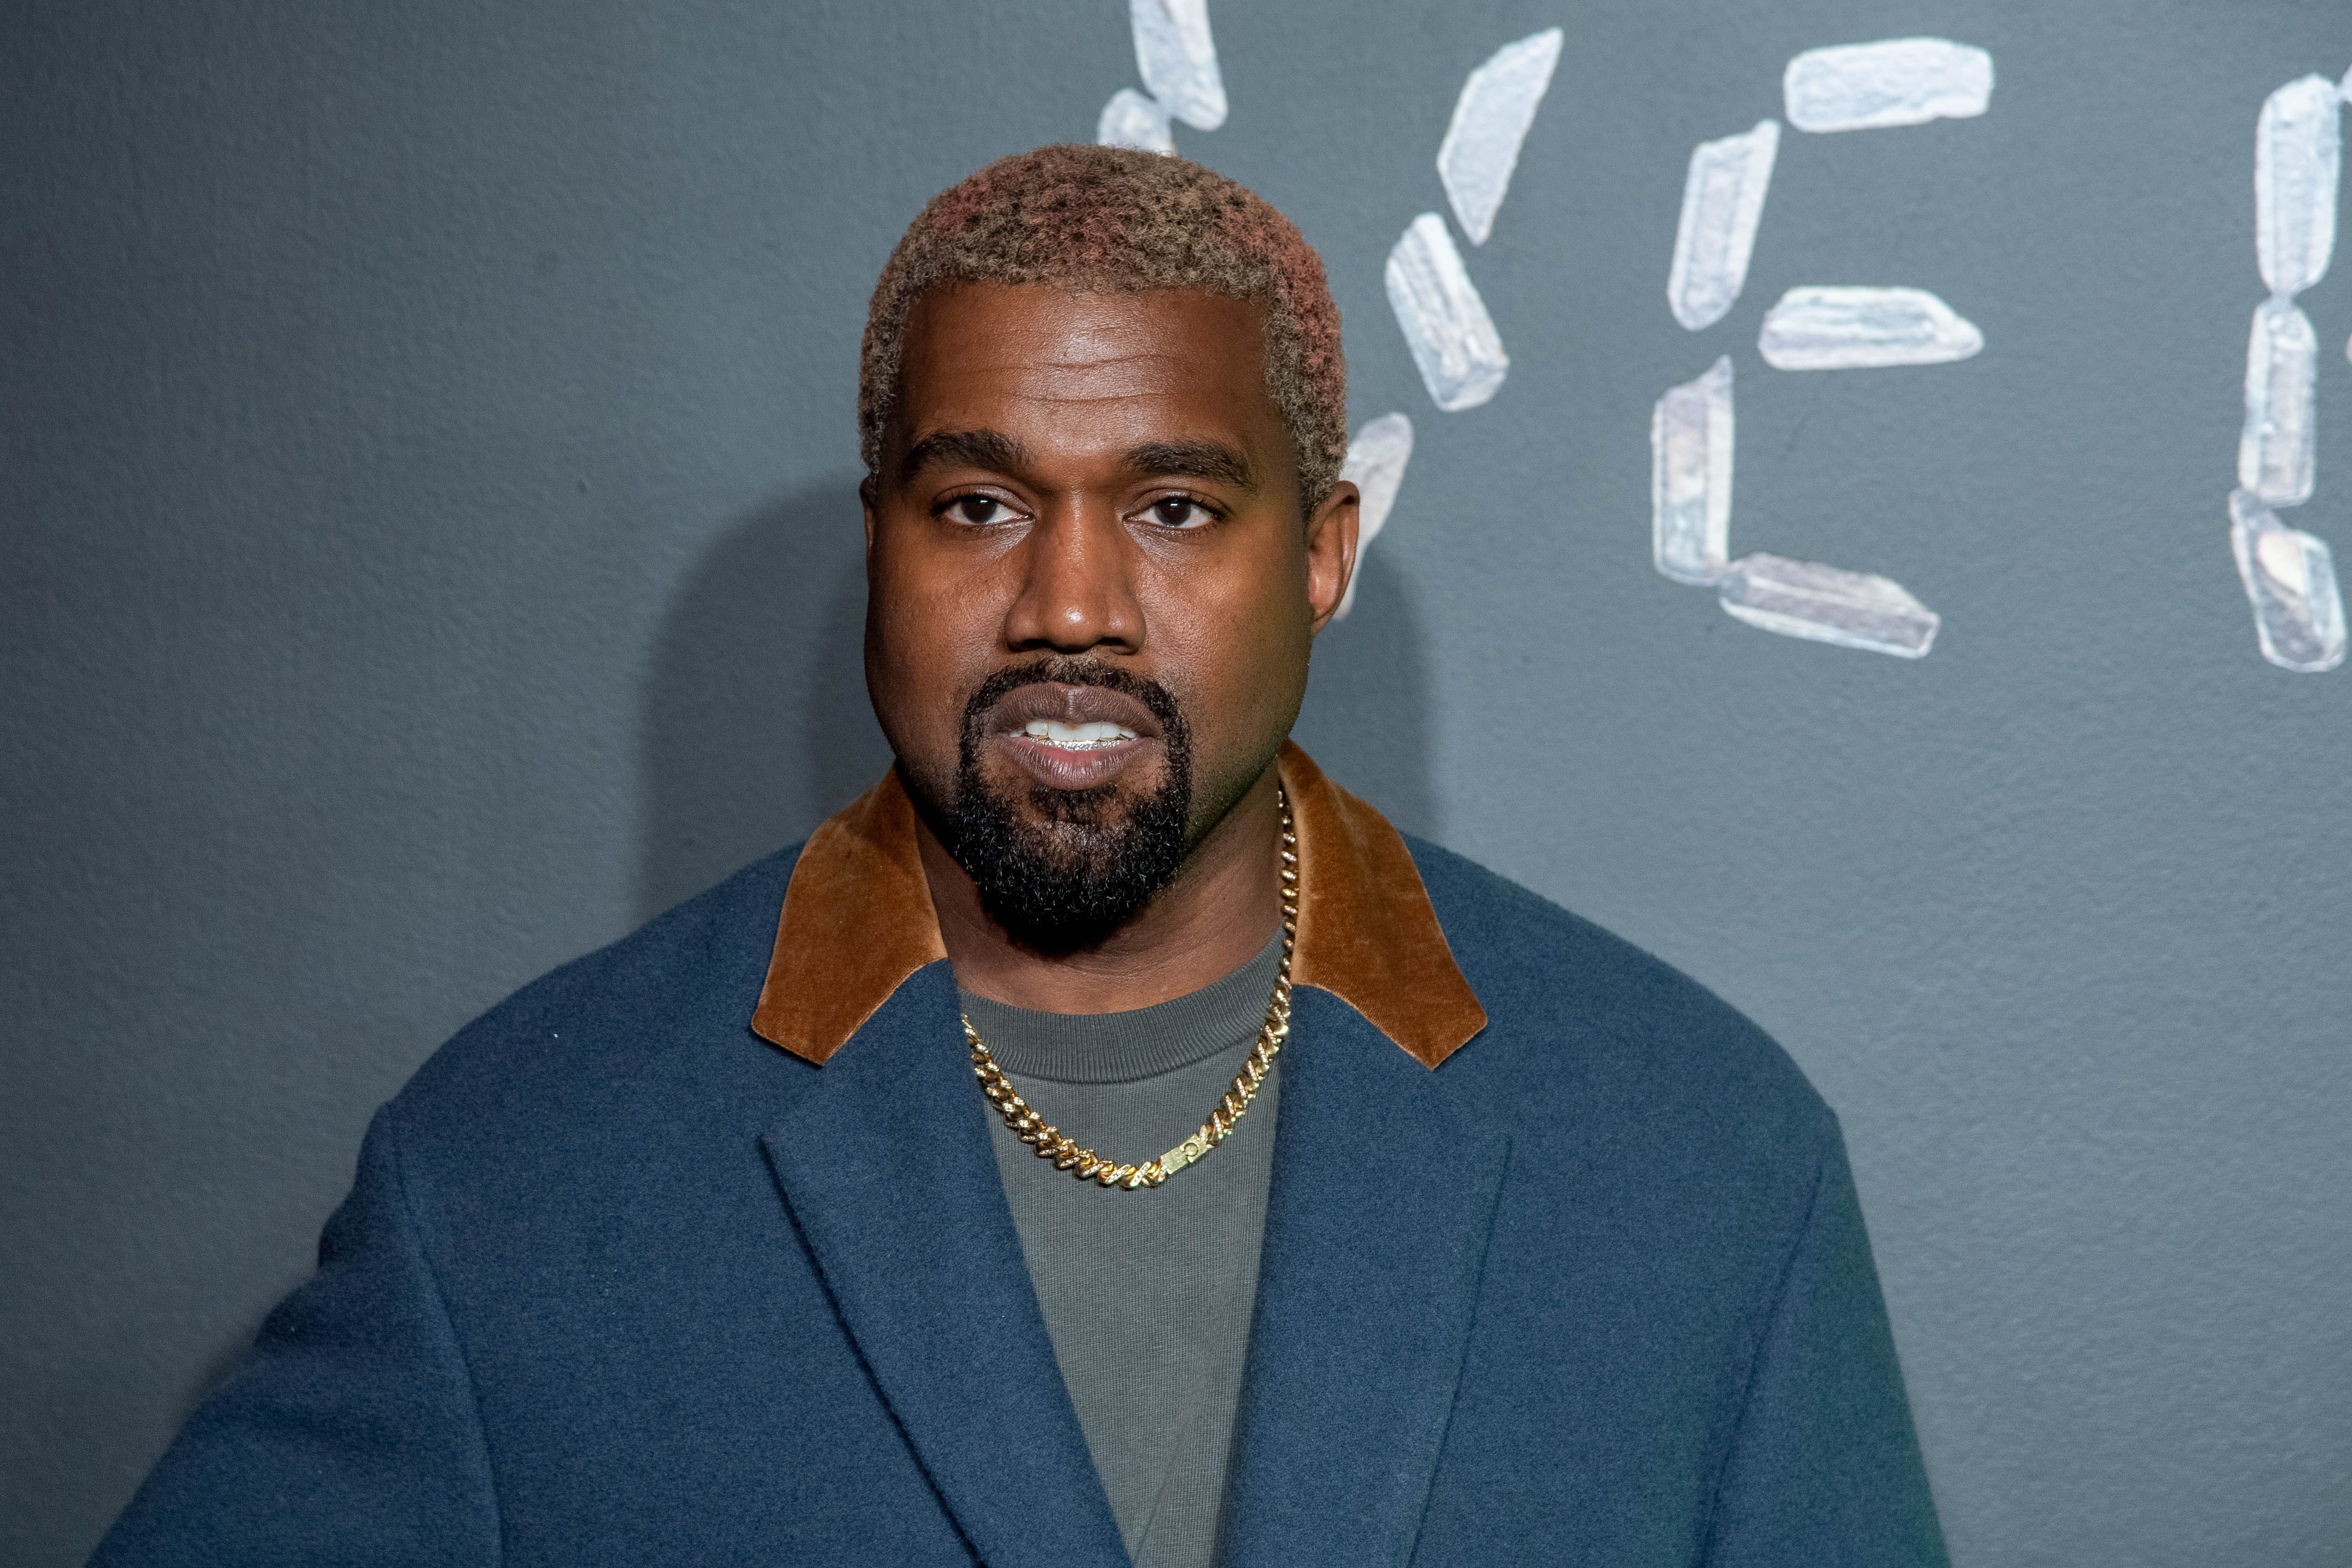 Kanye West at the the Versace fall 2019 fashion show at the American Stock Exchange Building on December 02, 2018 | Photo: Getty Images